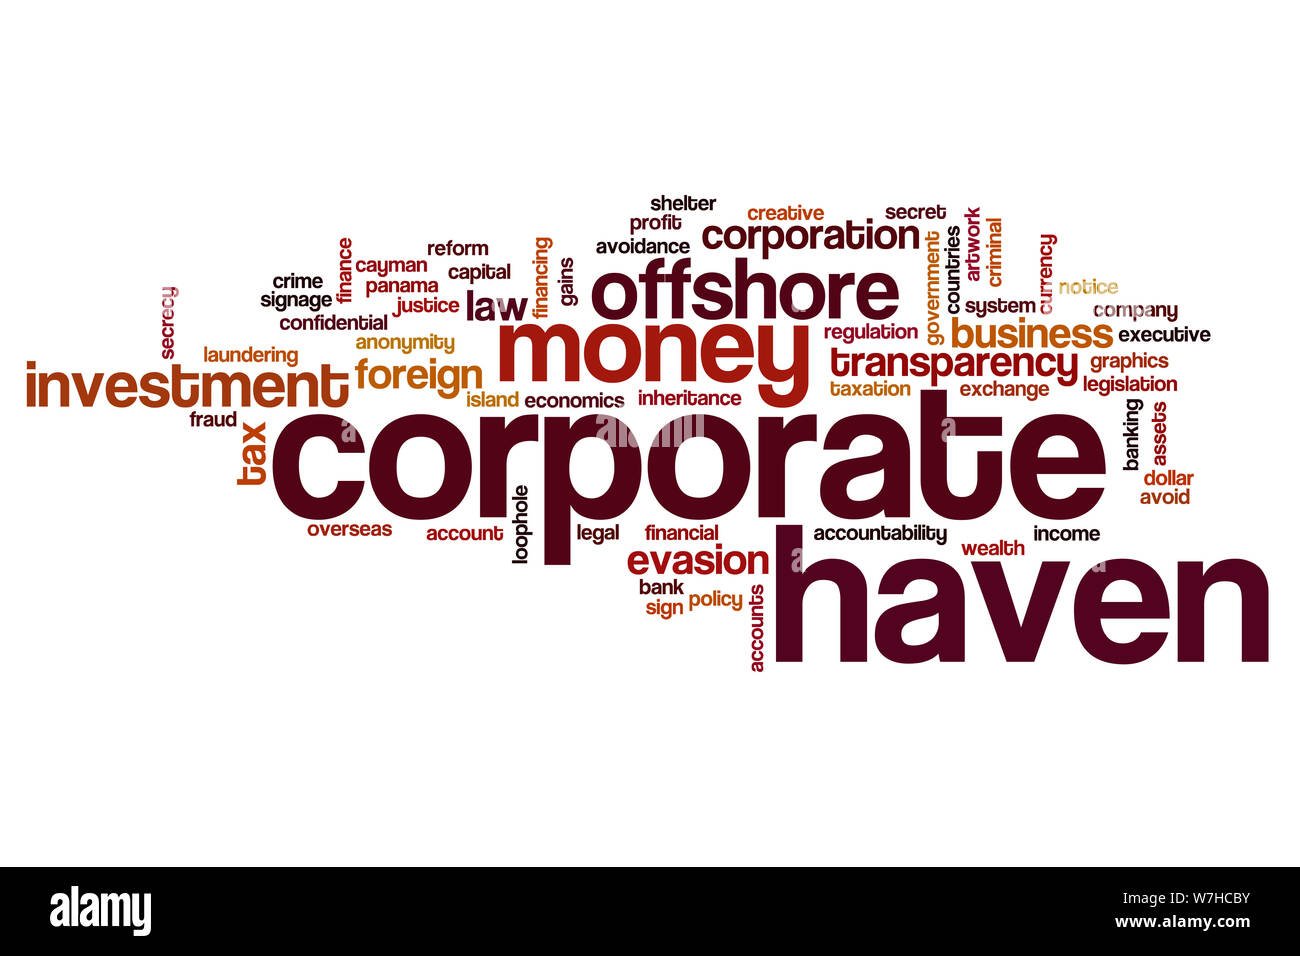 Corporate haven word cloud concept Stock Photo